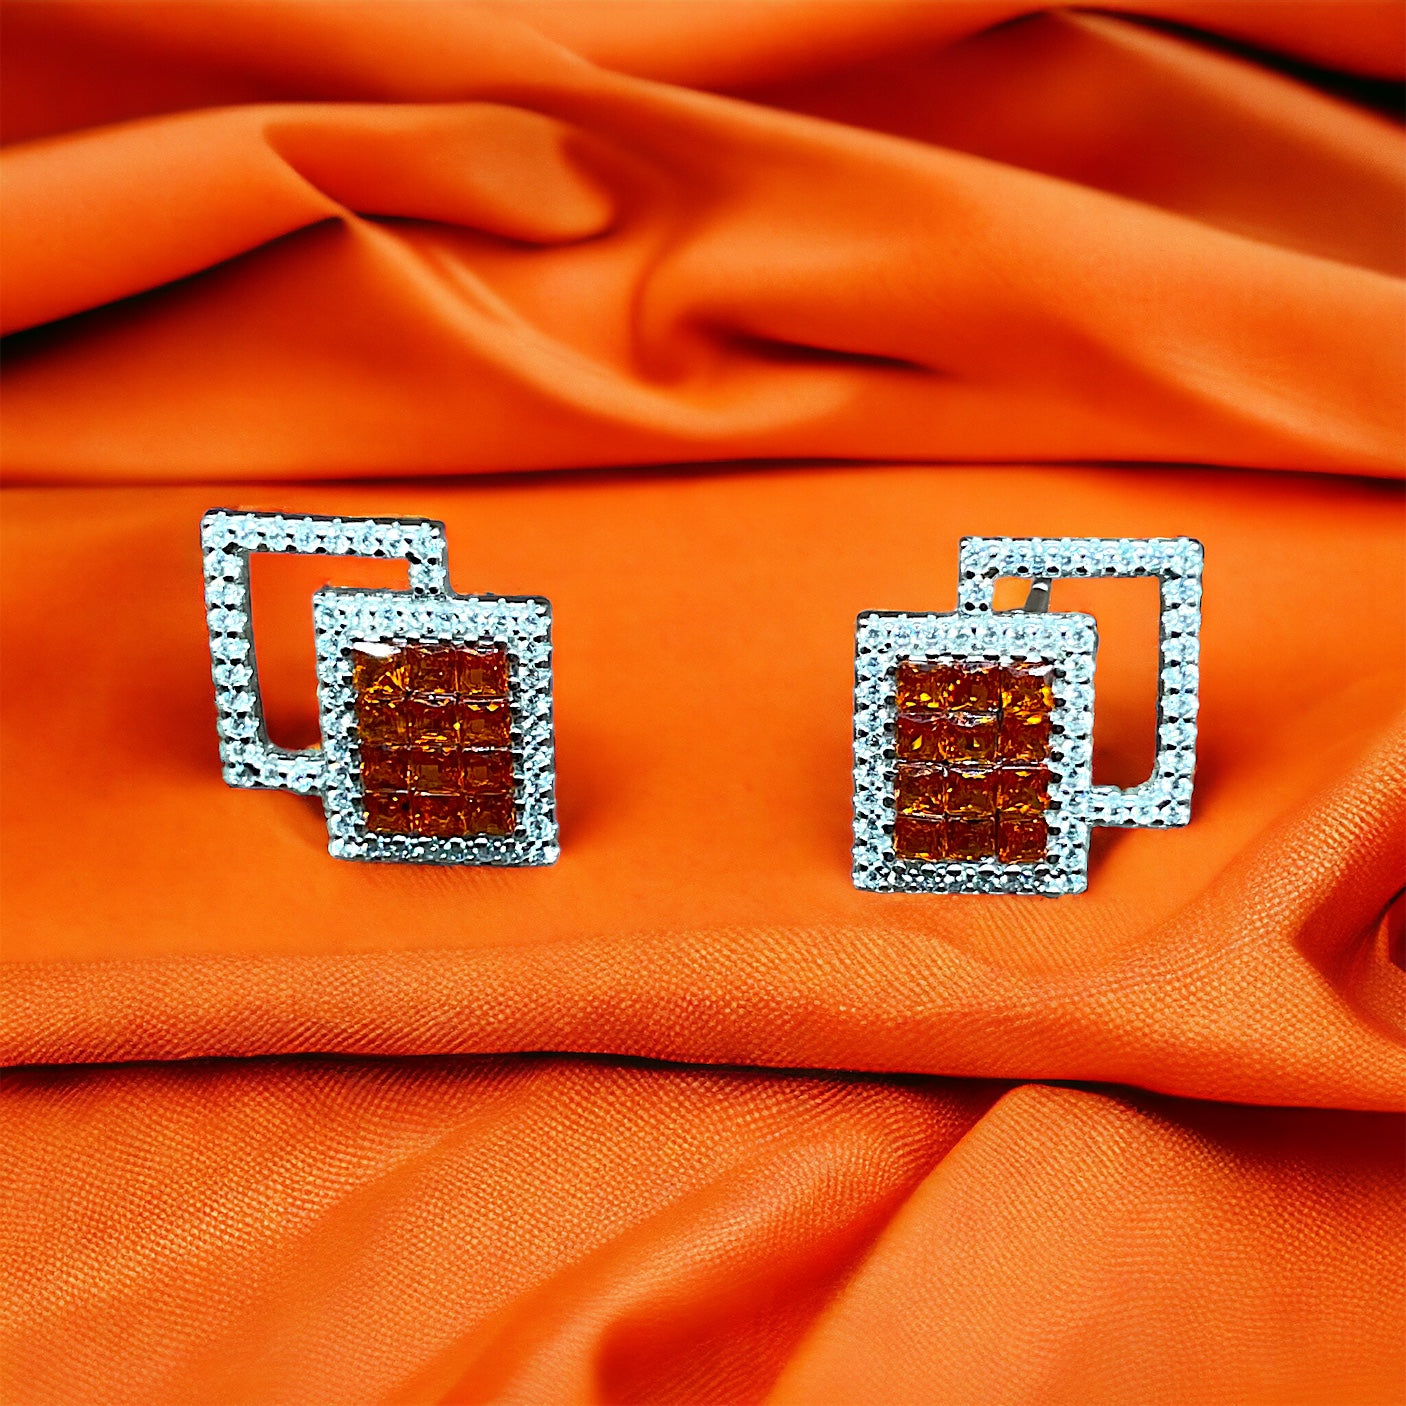 a close up of a pair of earrings on an orange cloth